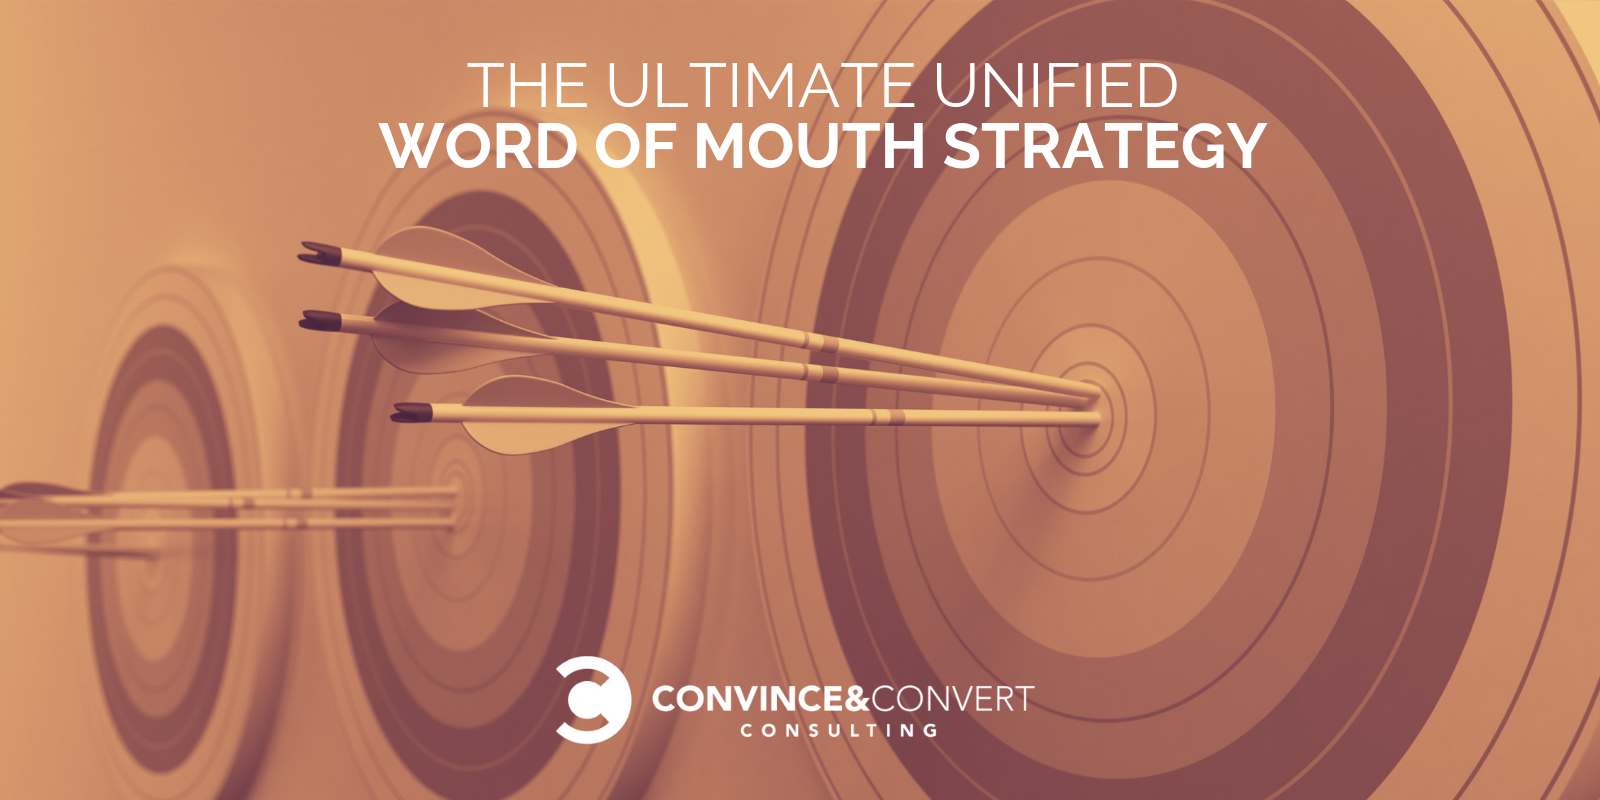 The Ultimate Unified Word of Mouth Strategy